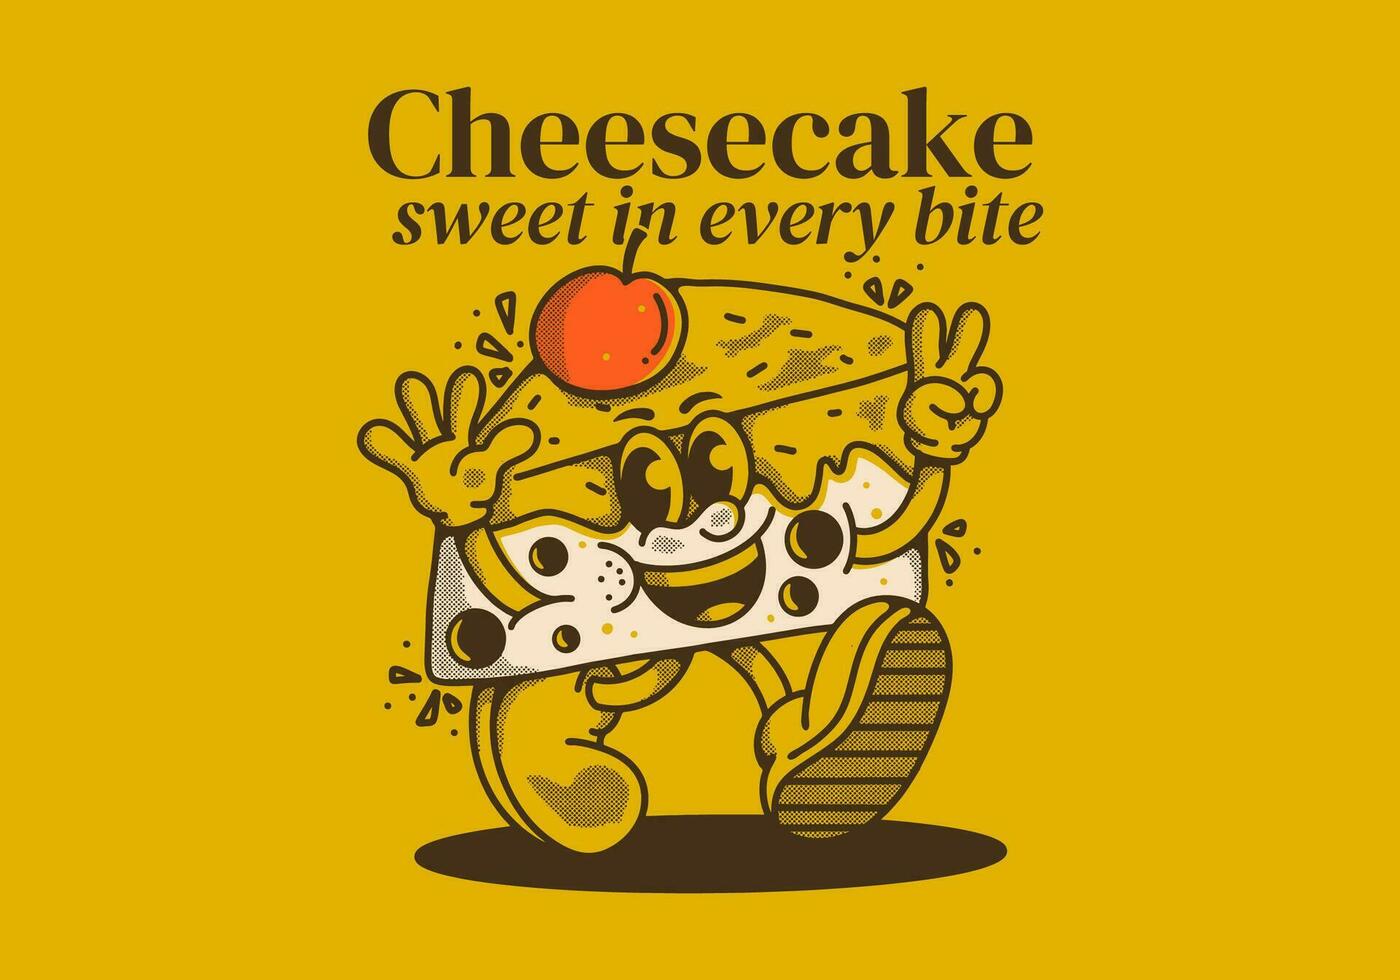 Cheesecake, sweet in every bite. Mascot character illustration of walking cheesecake vector